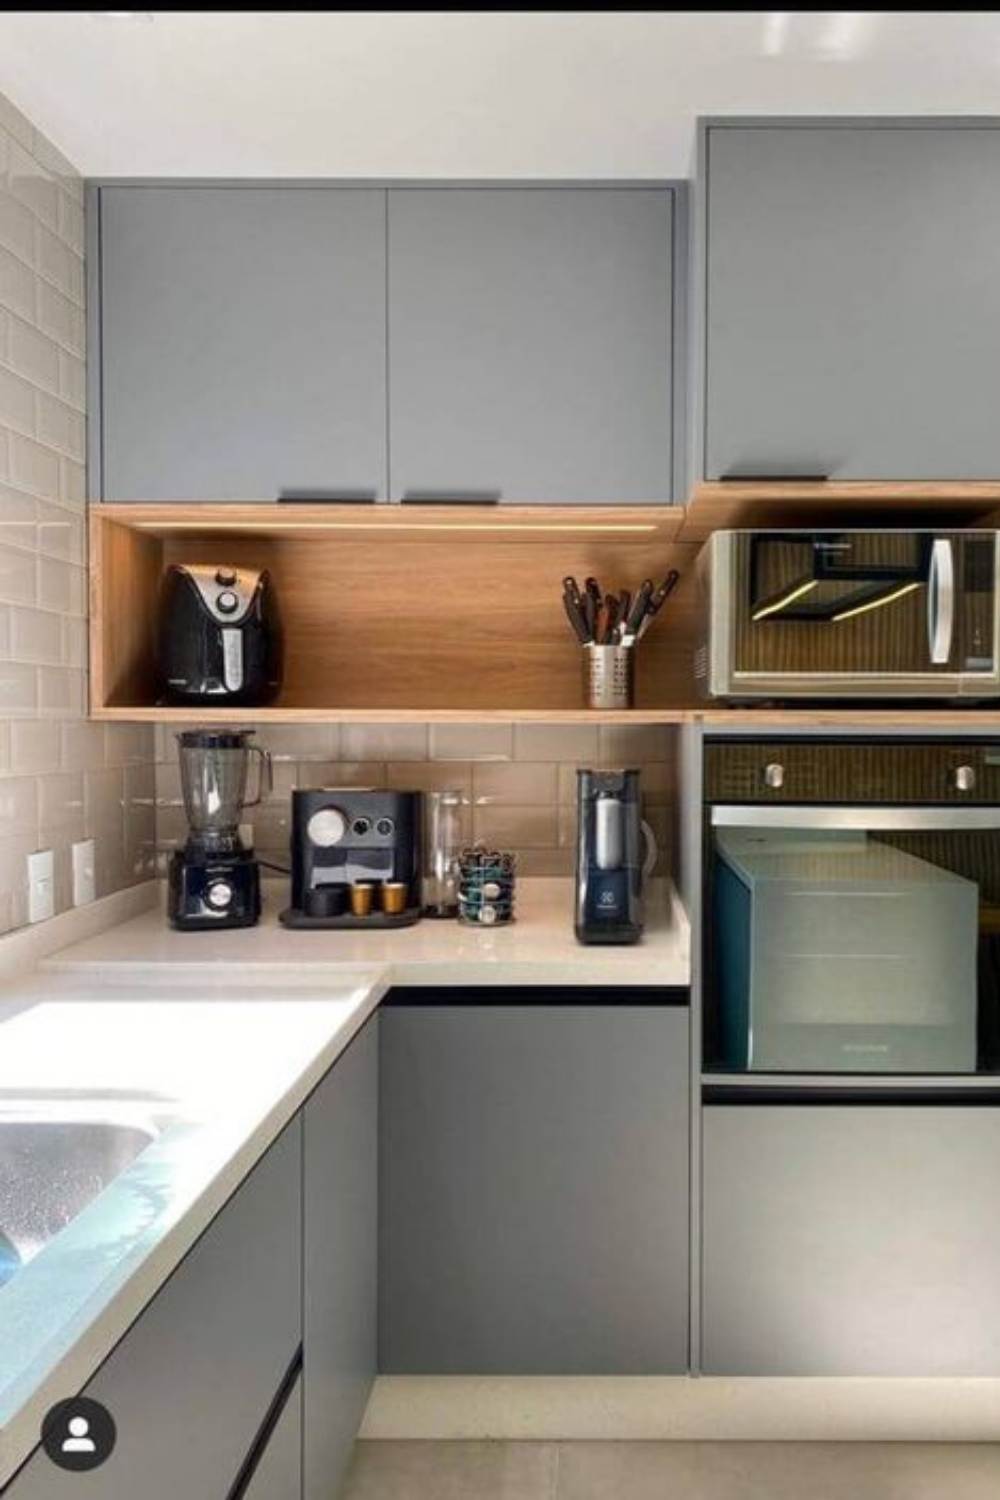 Innovative Solutions for Organizing Your Kitchen Cabinets